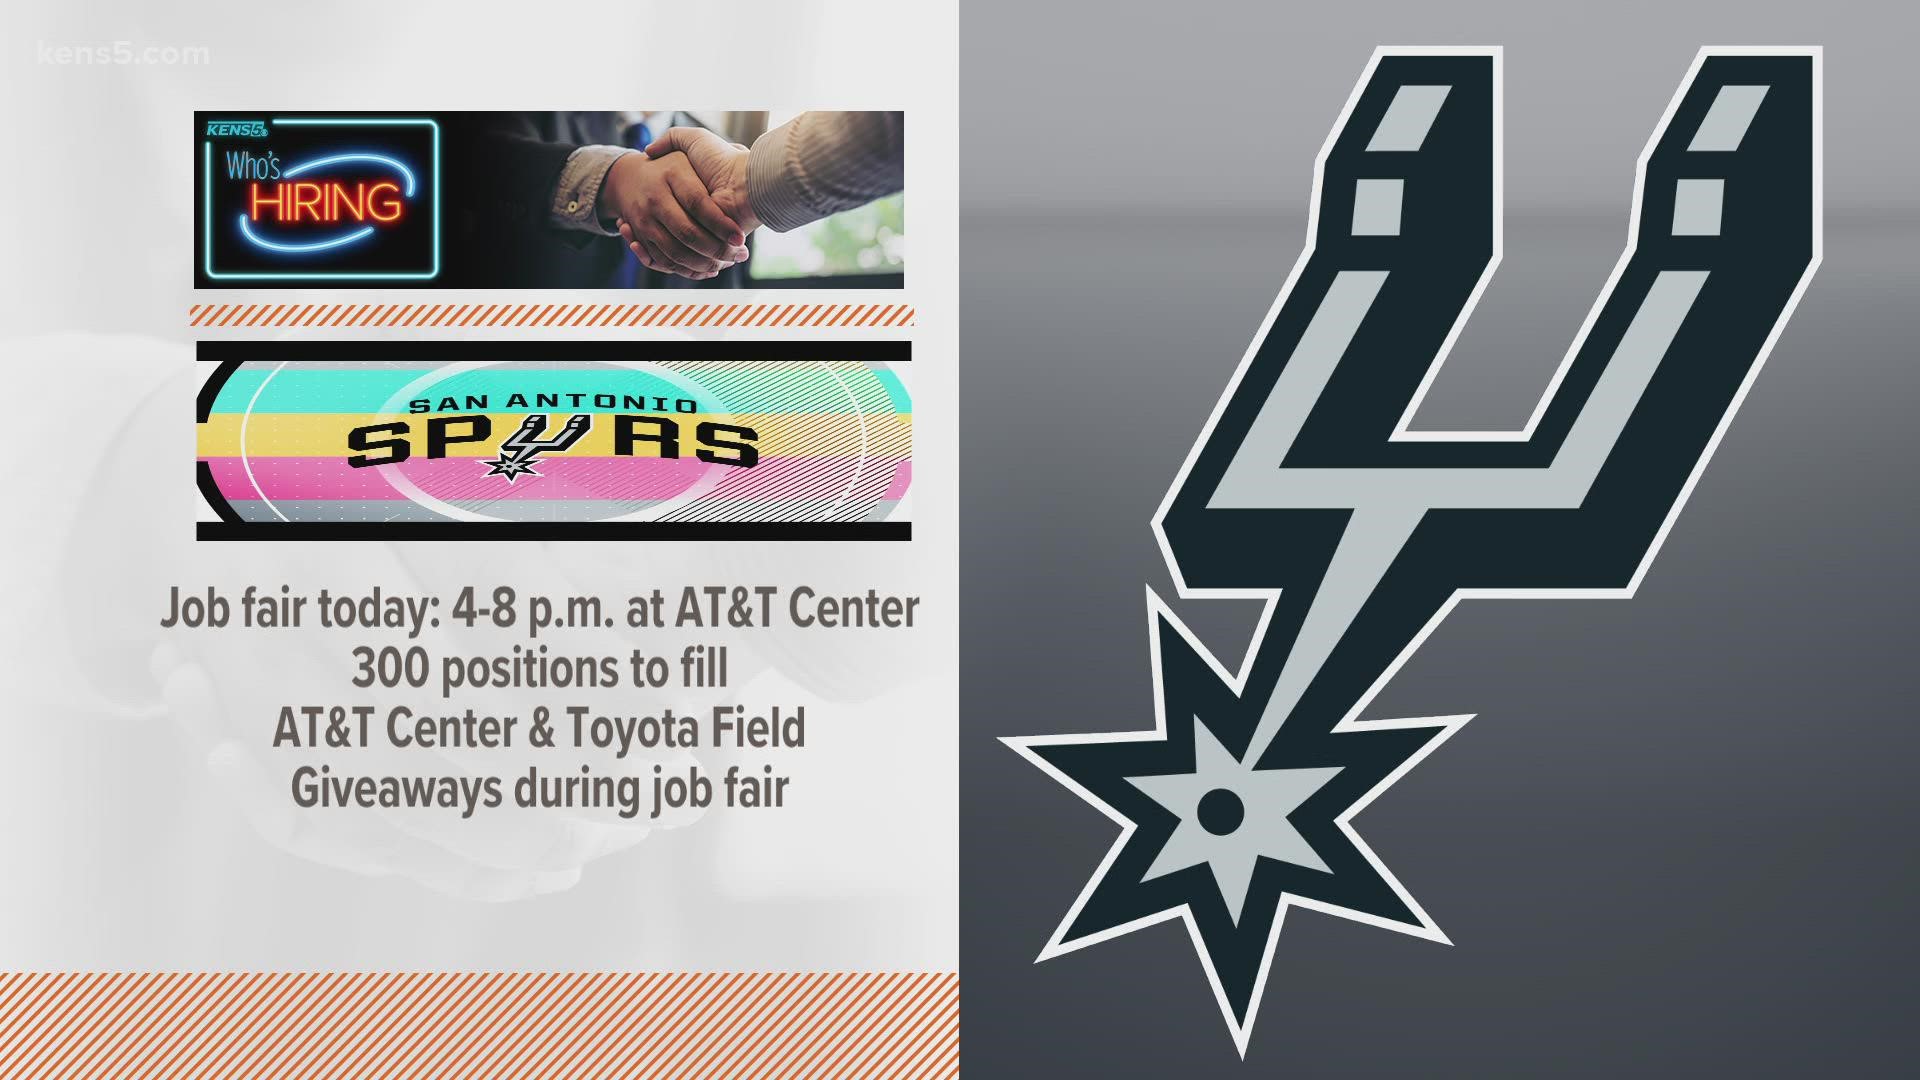 Spurs Sports and Entertainment is looking to fill 300 positions. They're also offering giveaways at their job fair.